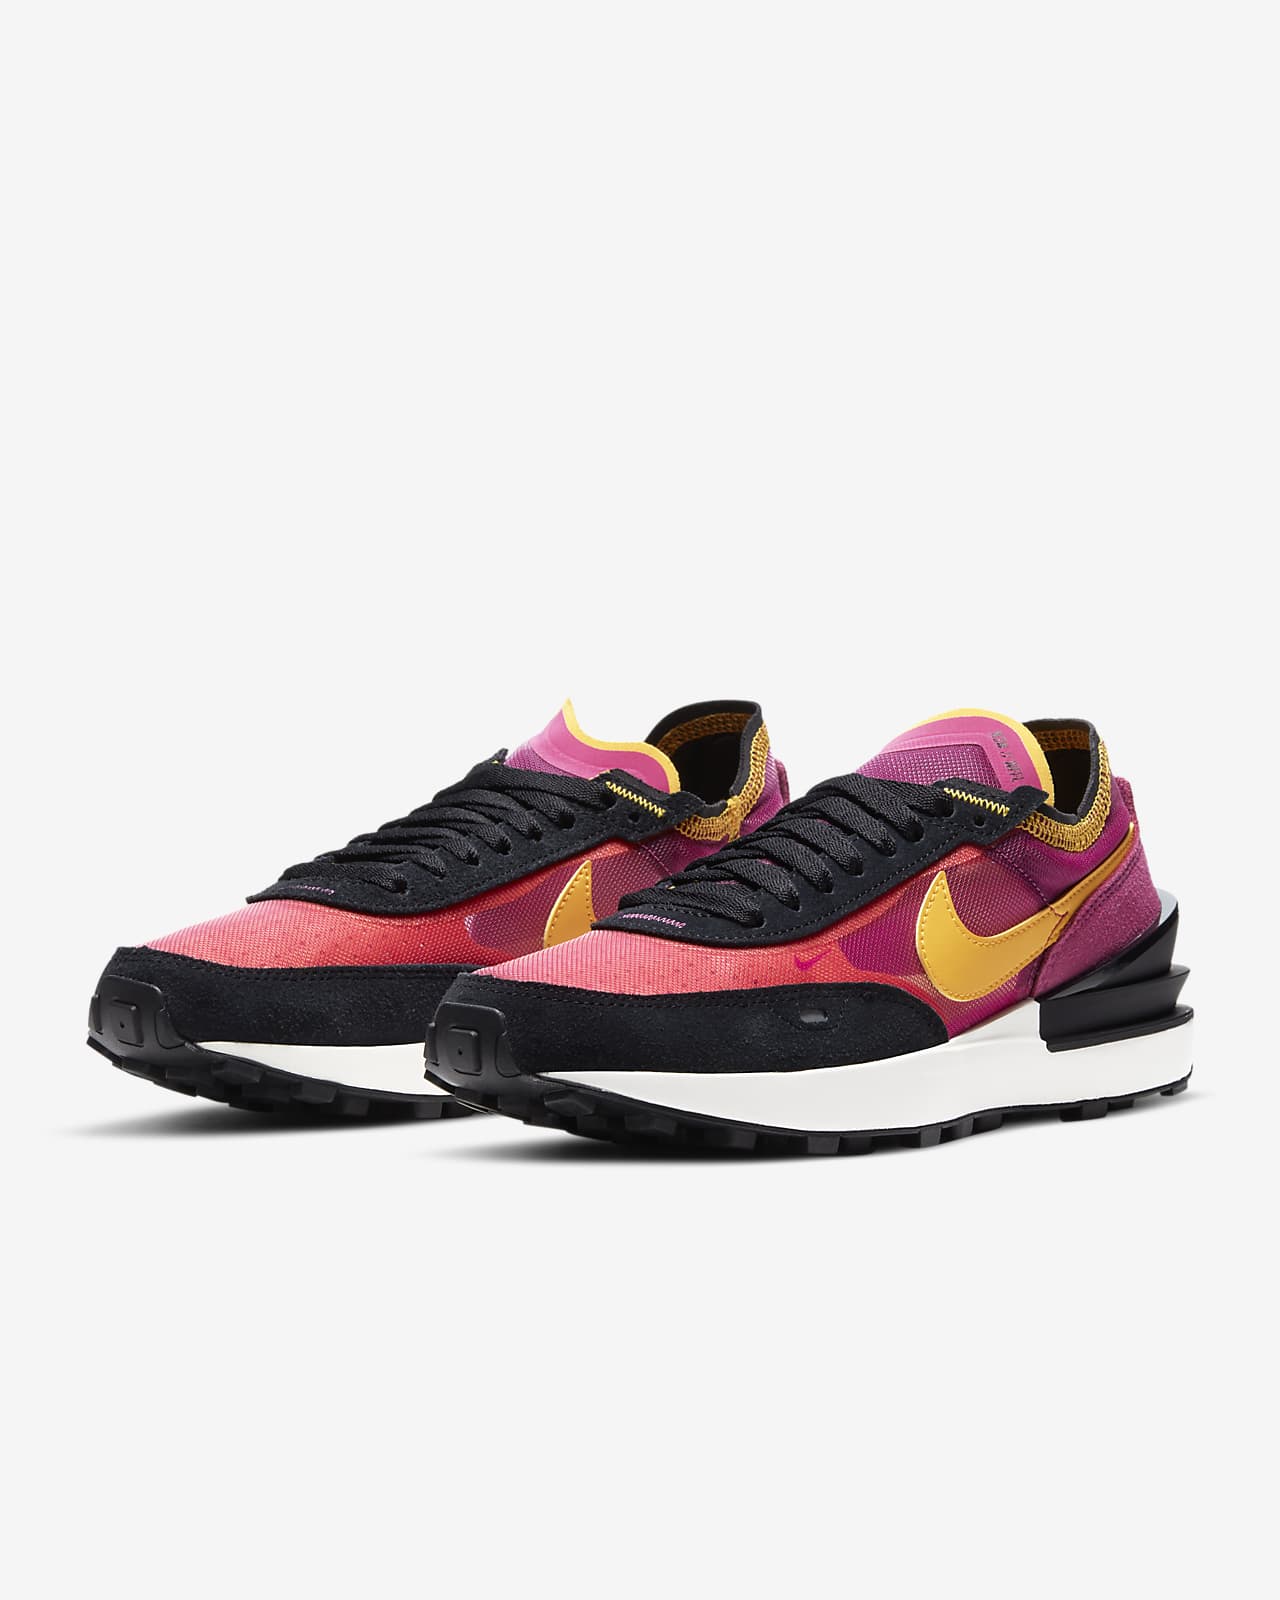 women's black and hot pink nike shoes